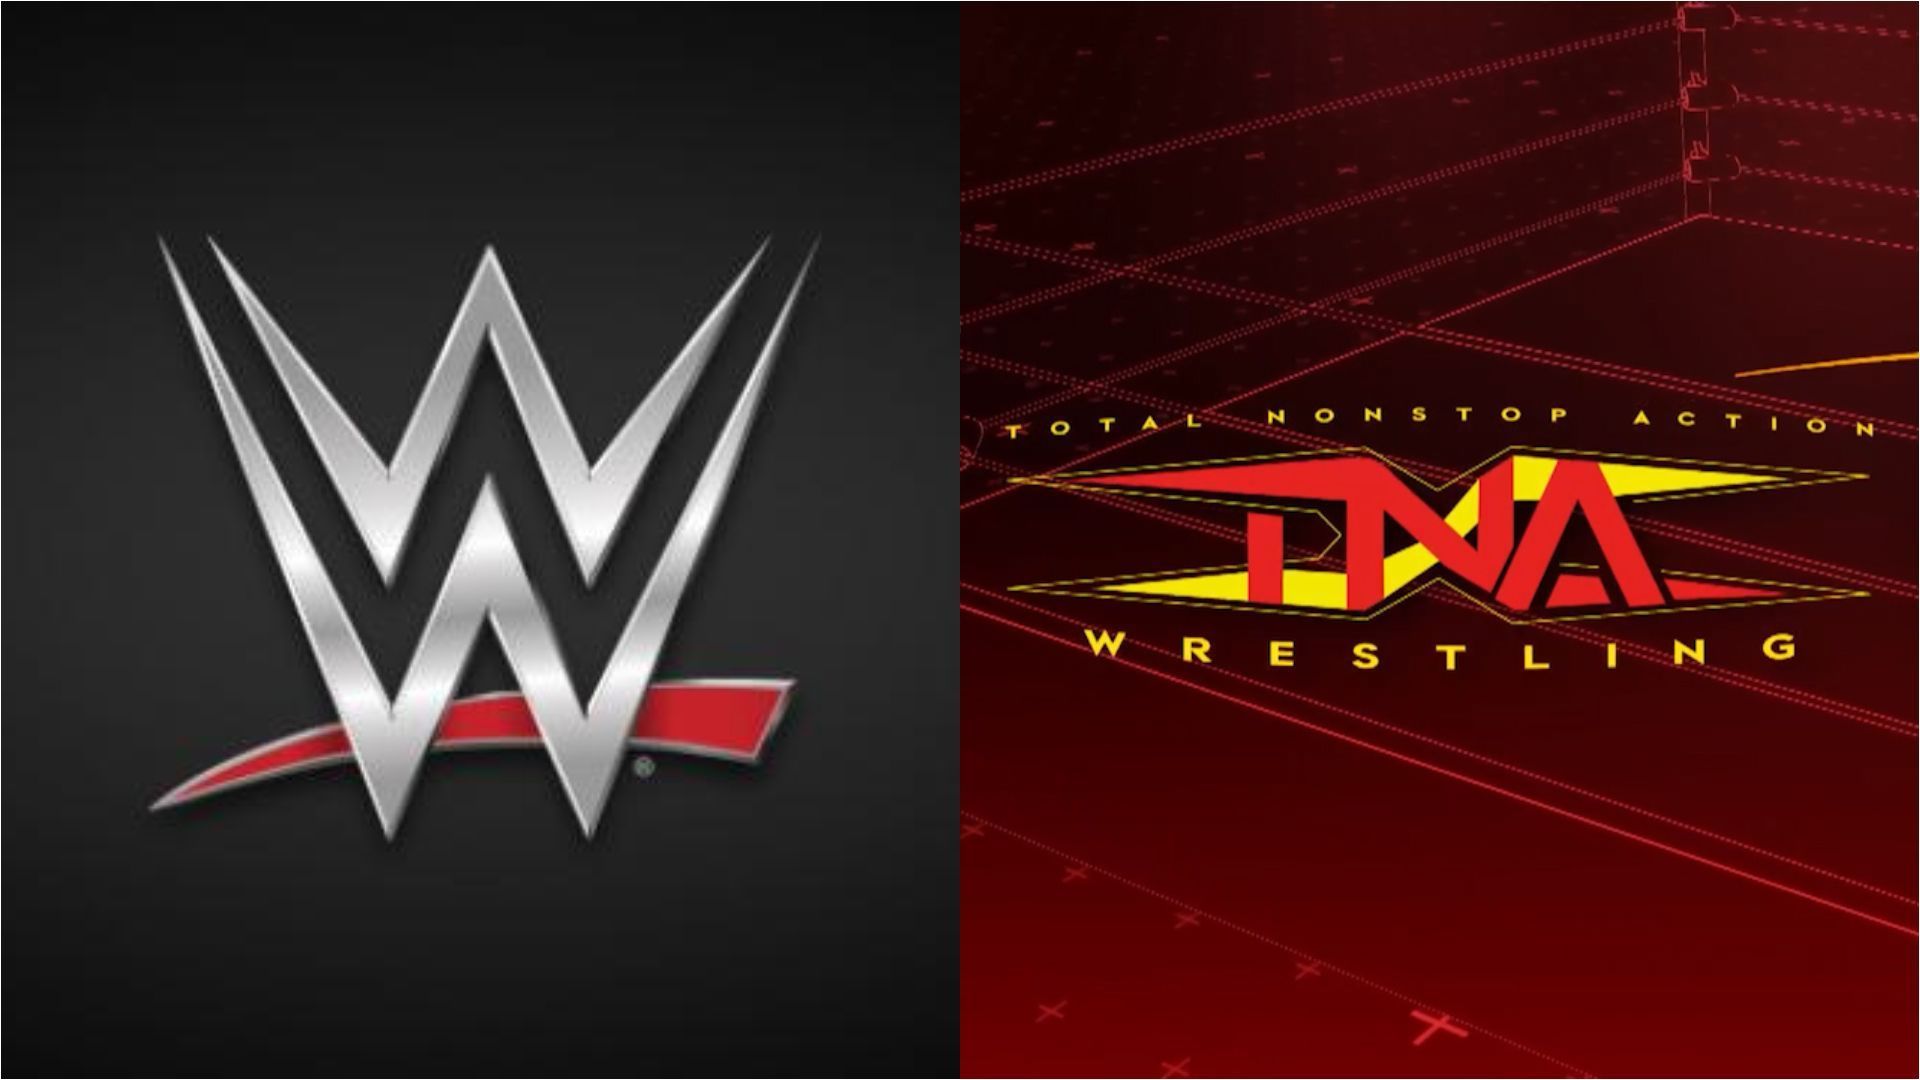 TNA and WWE are working together to entertain fans. (Images via WWE.com and TNAwrestling.com)